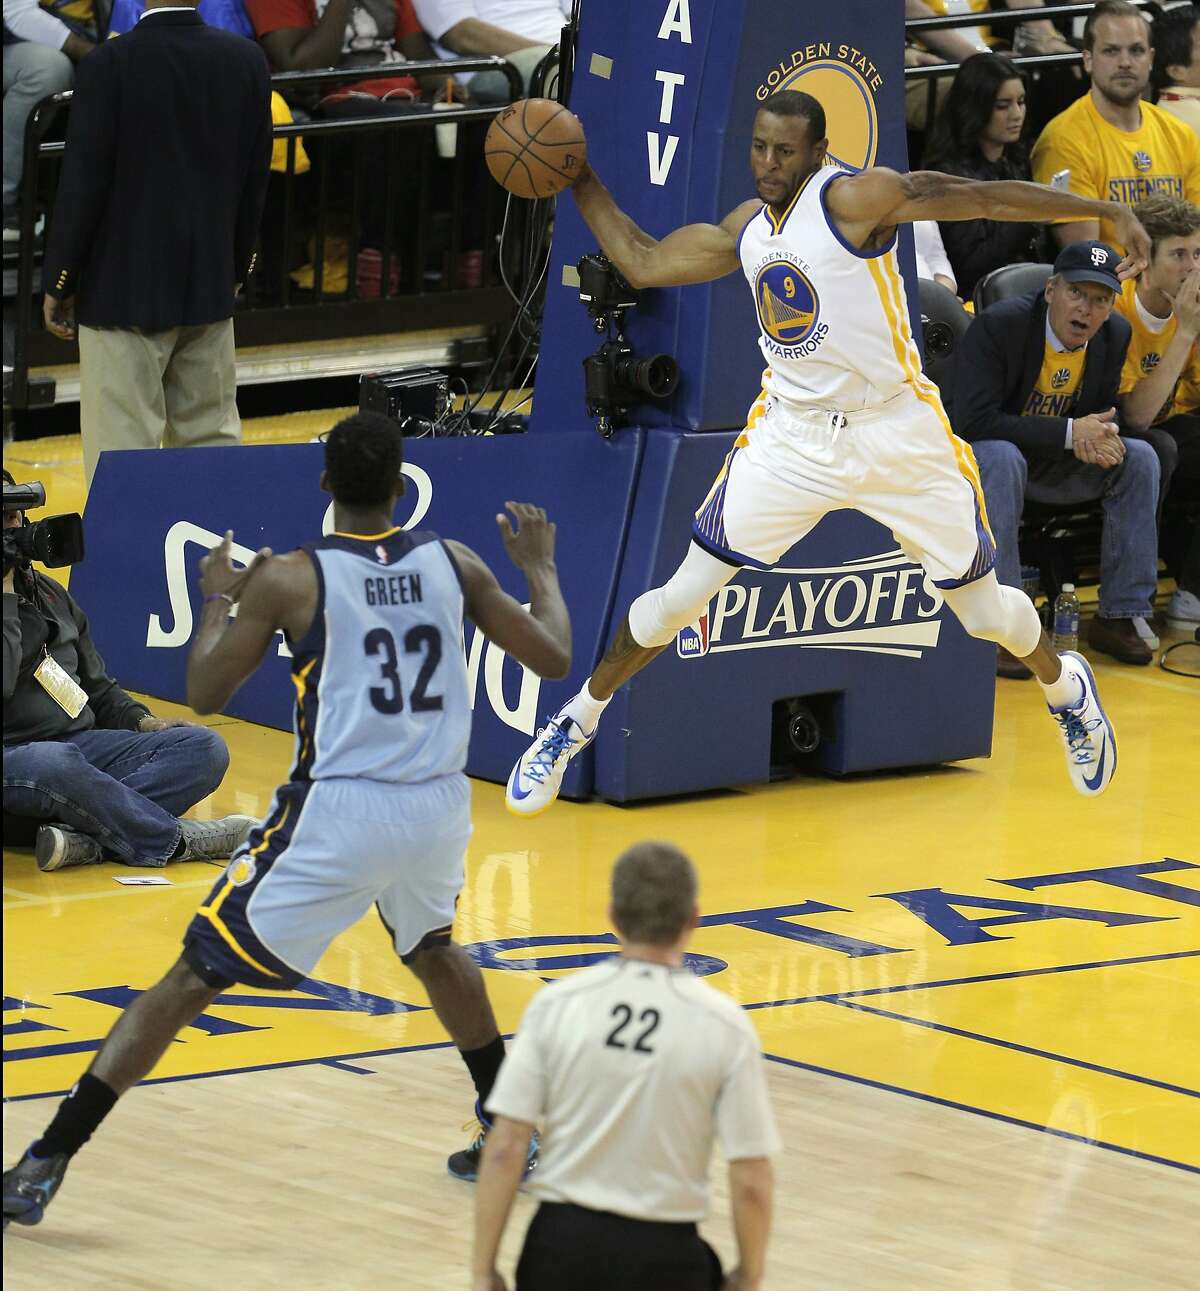 Andre Iguodala (9) saves the ball from going out of bounds In the first half. The Golden State Warriors played the Memphis Grizzlies in Game 5 of the Western Conference Semifinals at Oracle Arena in Oakland, Calif., on Wednesday, May 13, 2015.